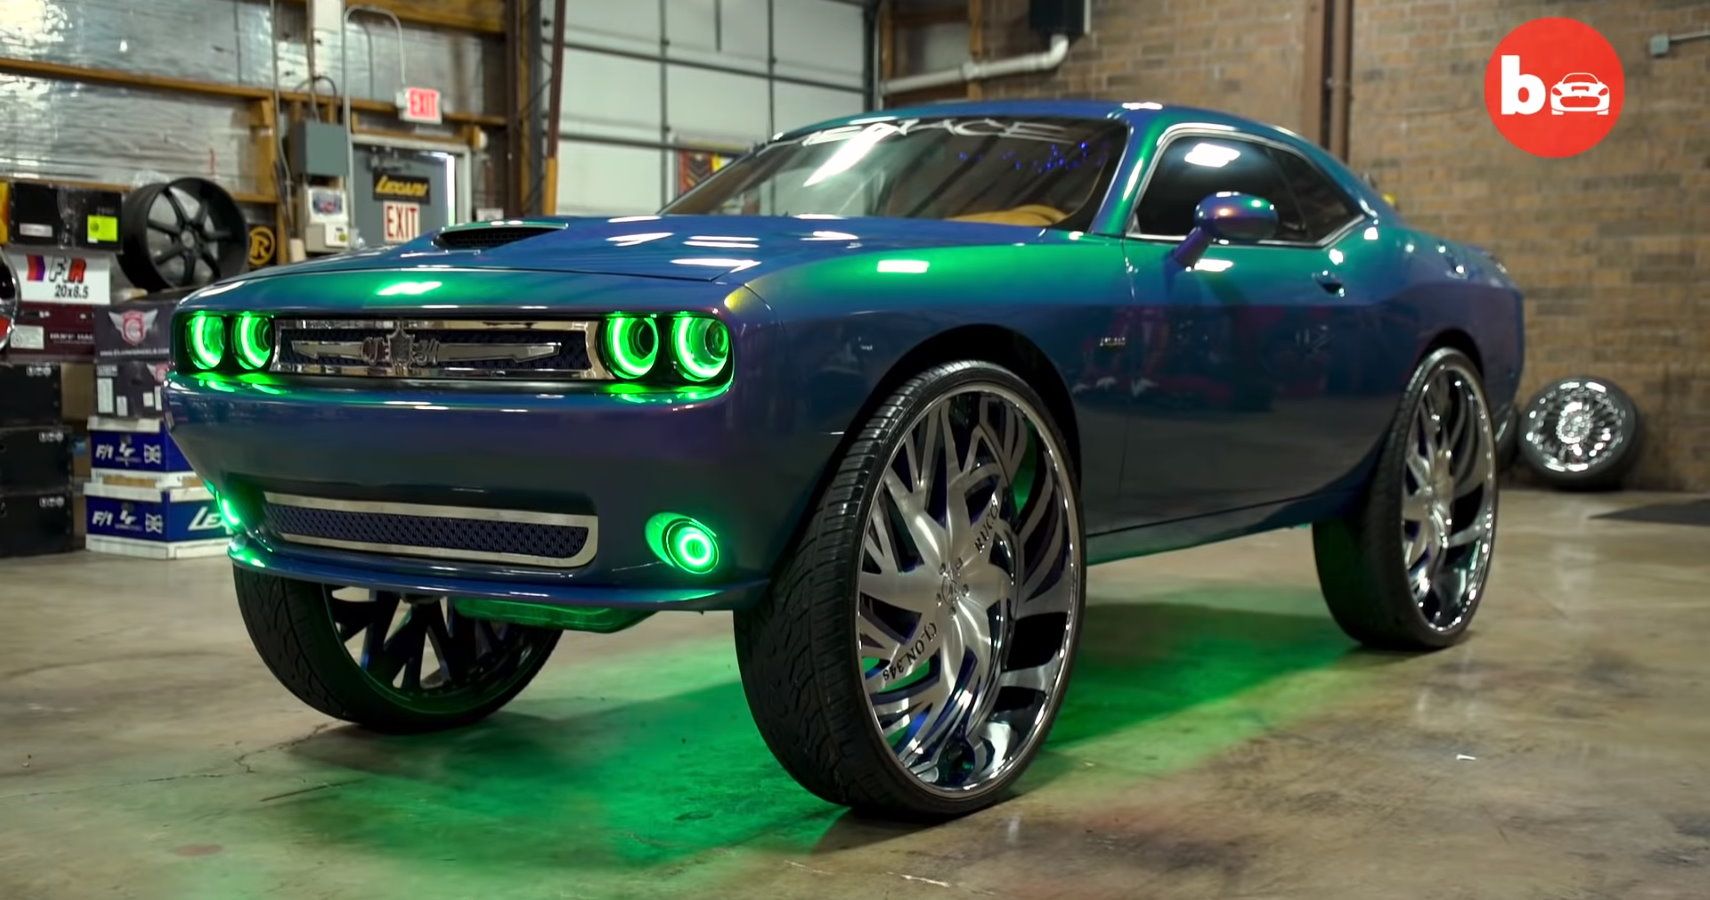 Ridiculous Dodge Challenger Has Massive 34-Inch Rims And ...